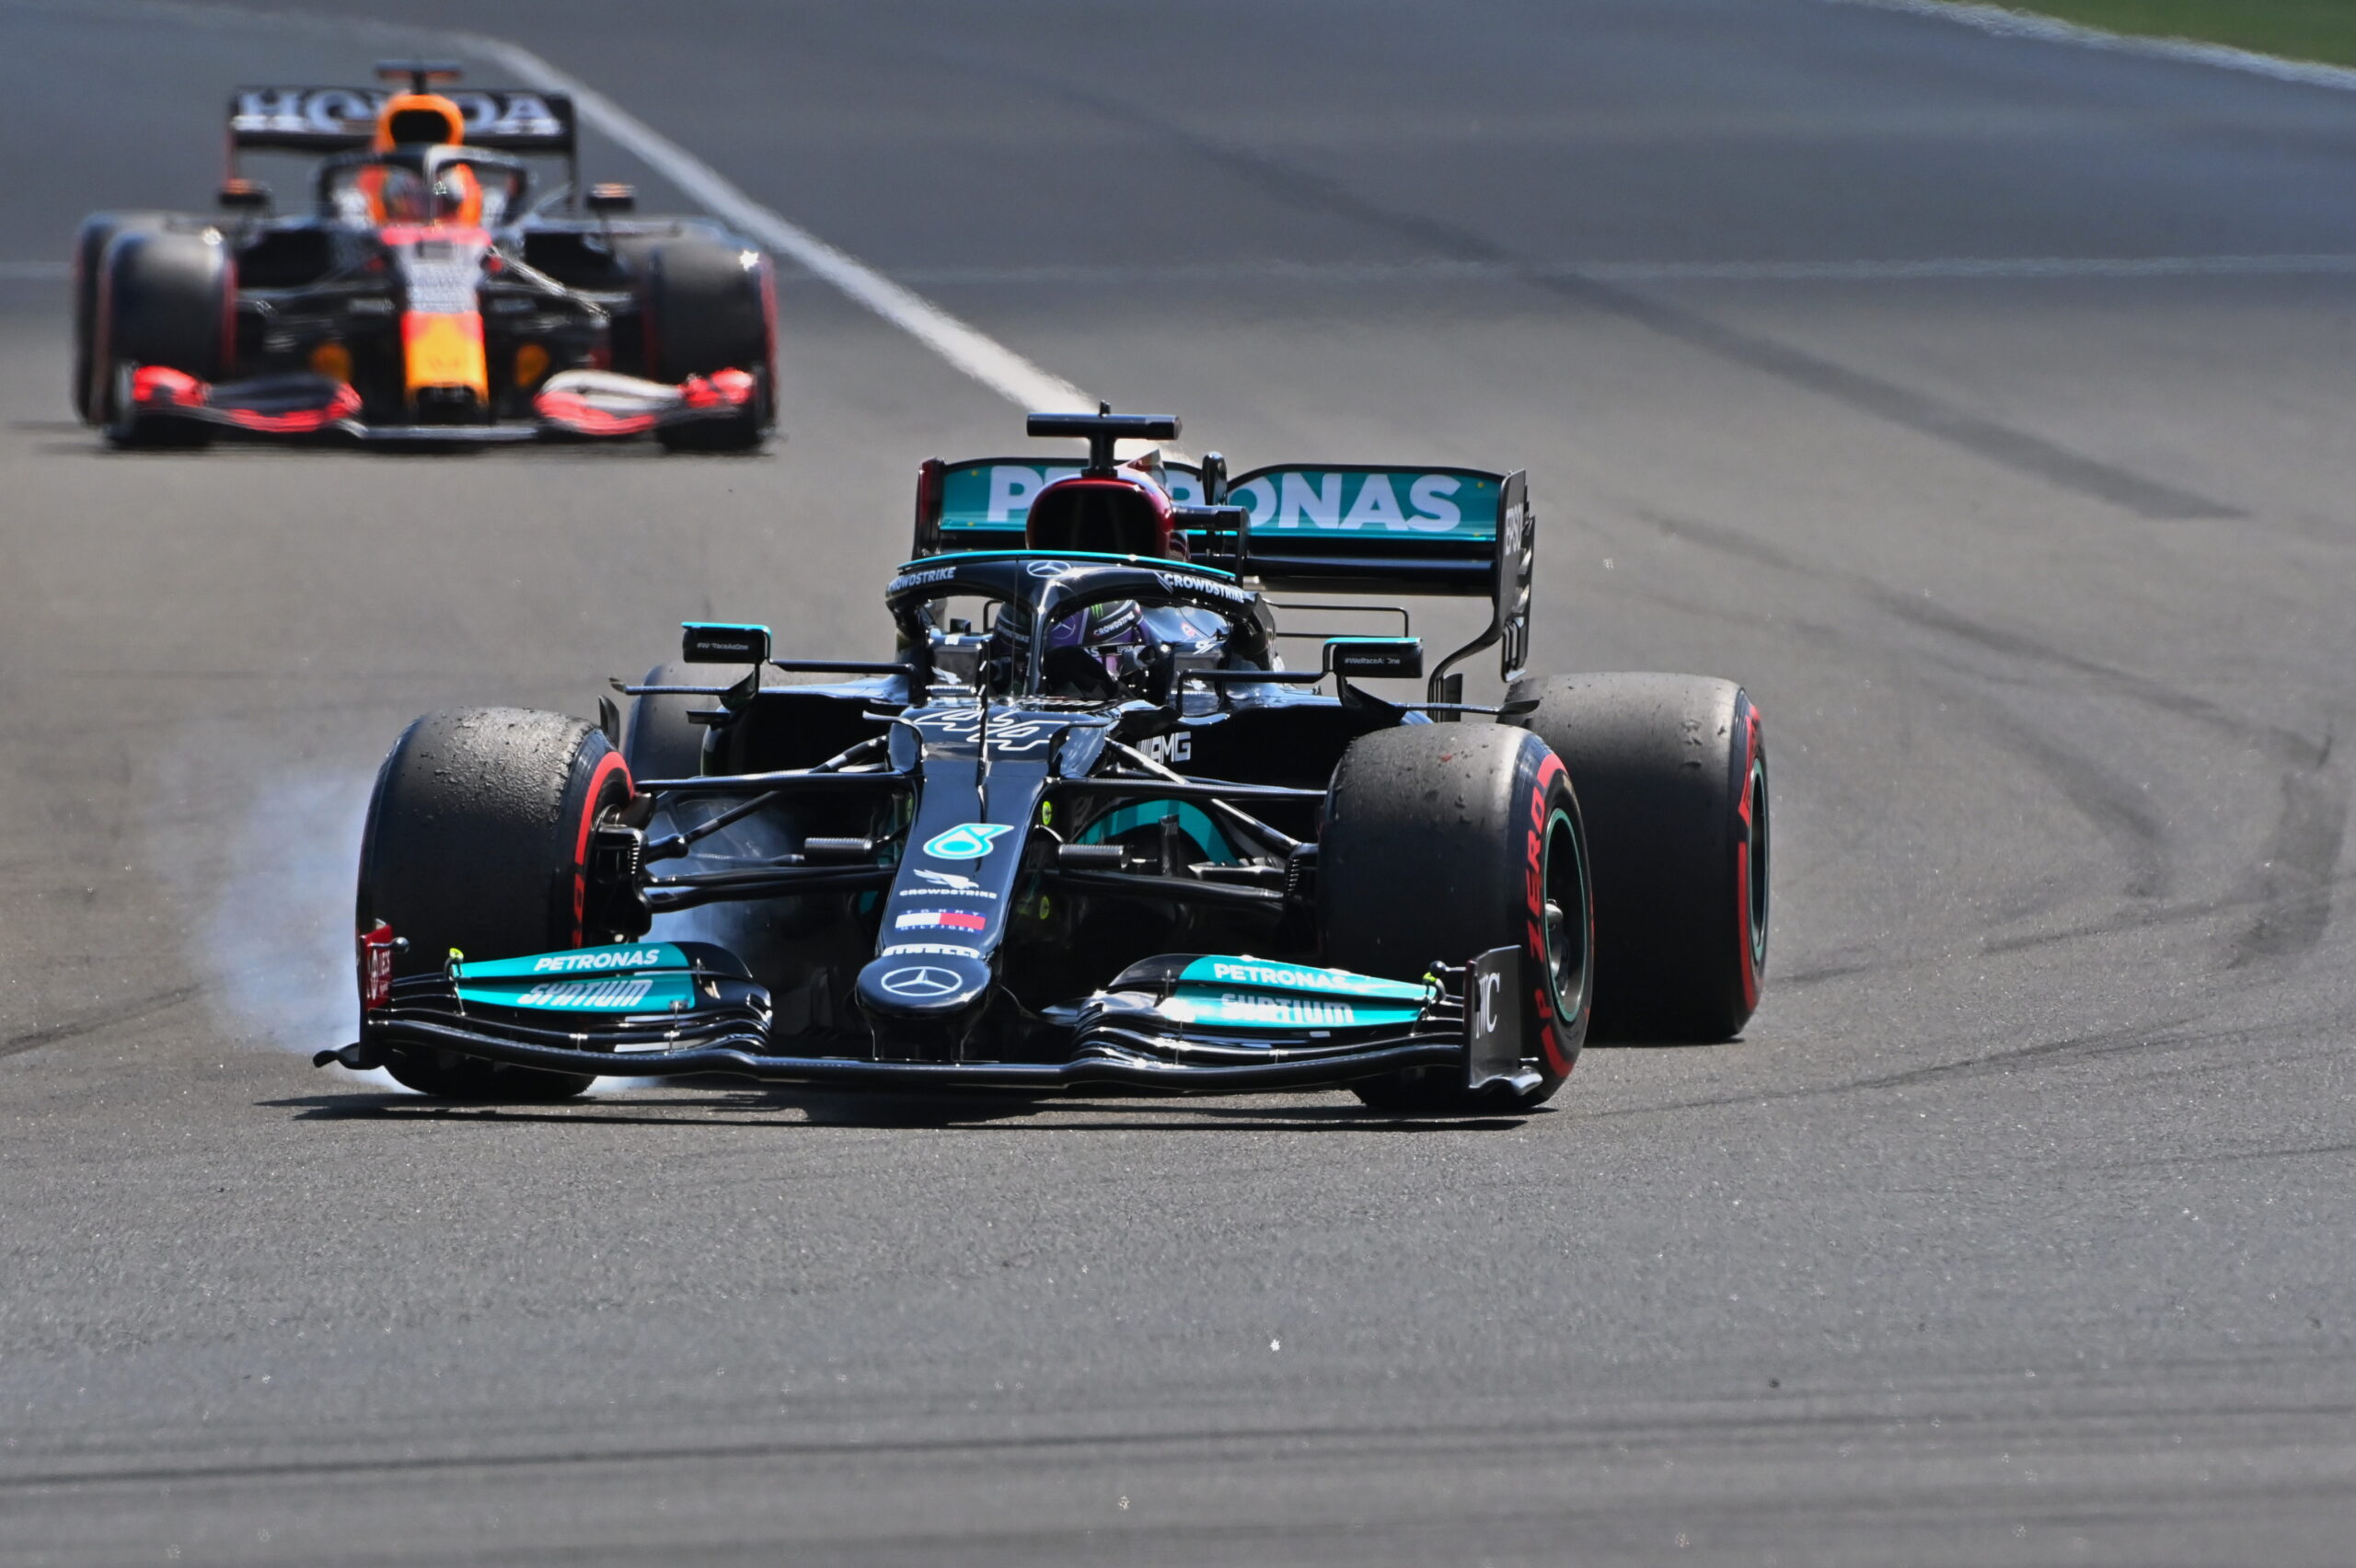 In particular, Lewis Hamilton presses on for another duel with Max Verstappen and Red Bull Racing Honda. (Photo: Wolfgang Wilhelm | Mercedes-AMG Petronas Formula One Team)